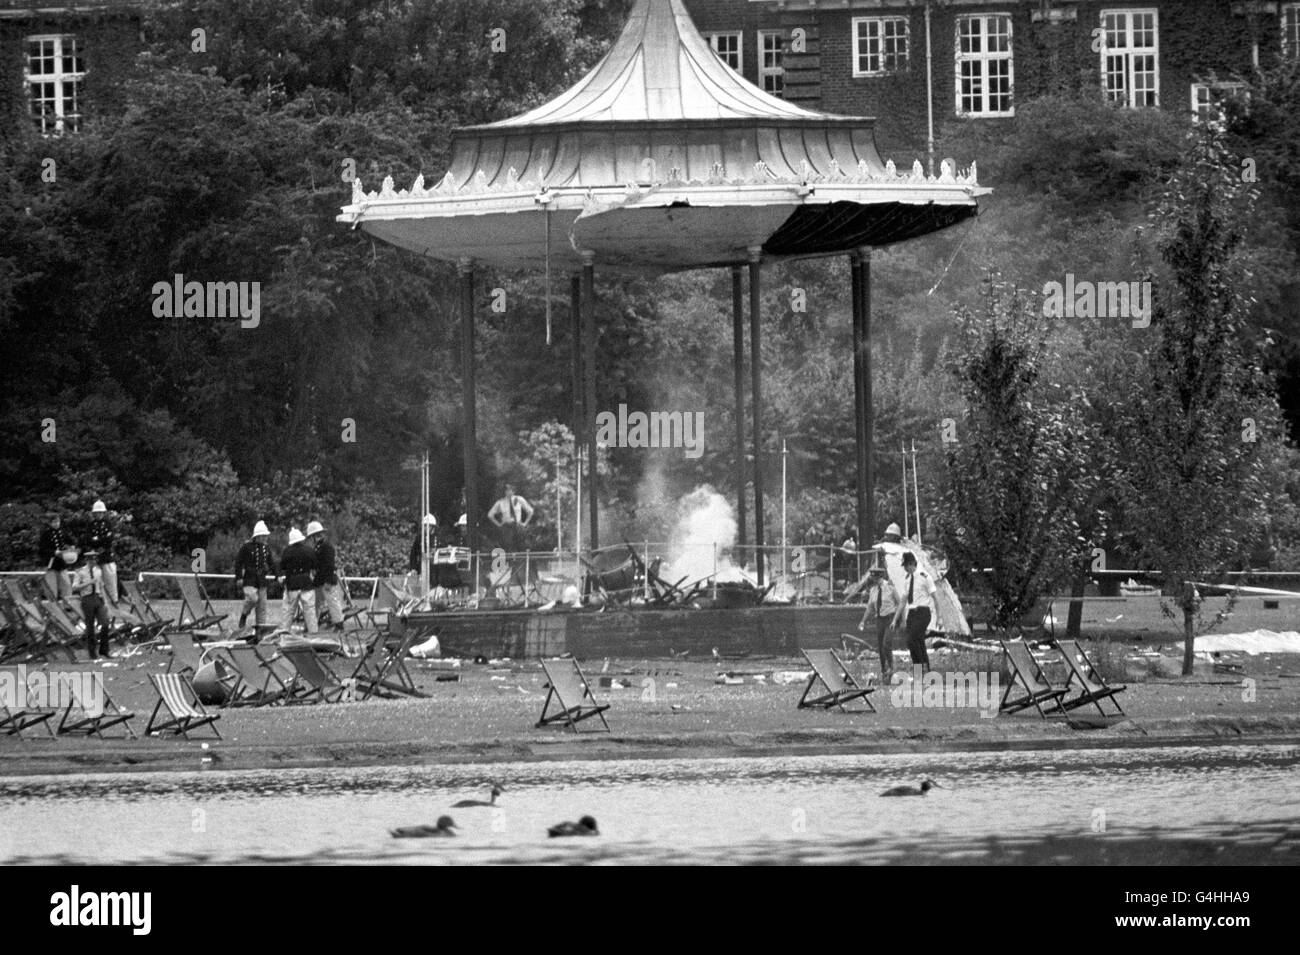 Police and Firemen at the still-smouldering bandstand in Regents Park, London, following the IRA bomb blast that killed six people and left many others seriously injured. Stock Photo